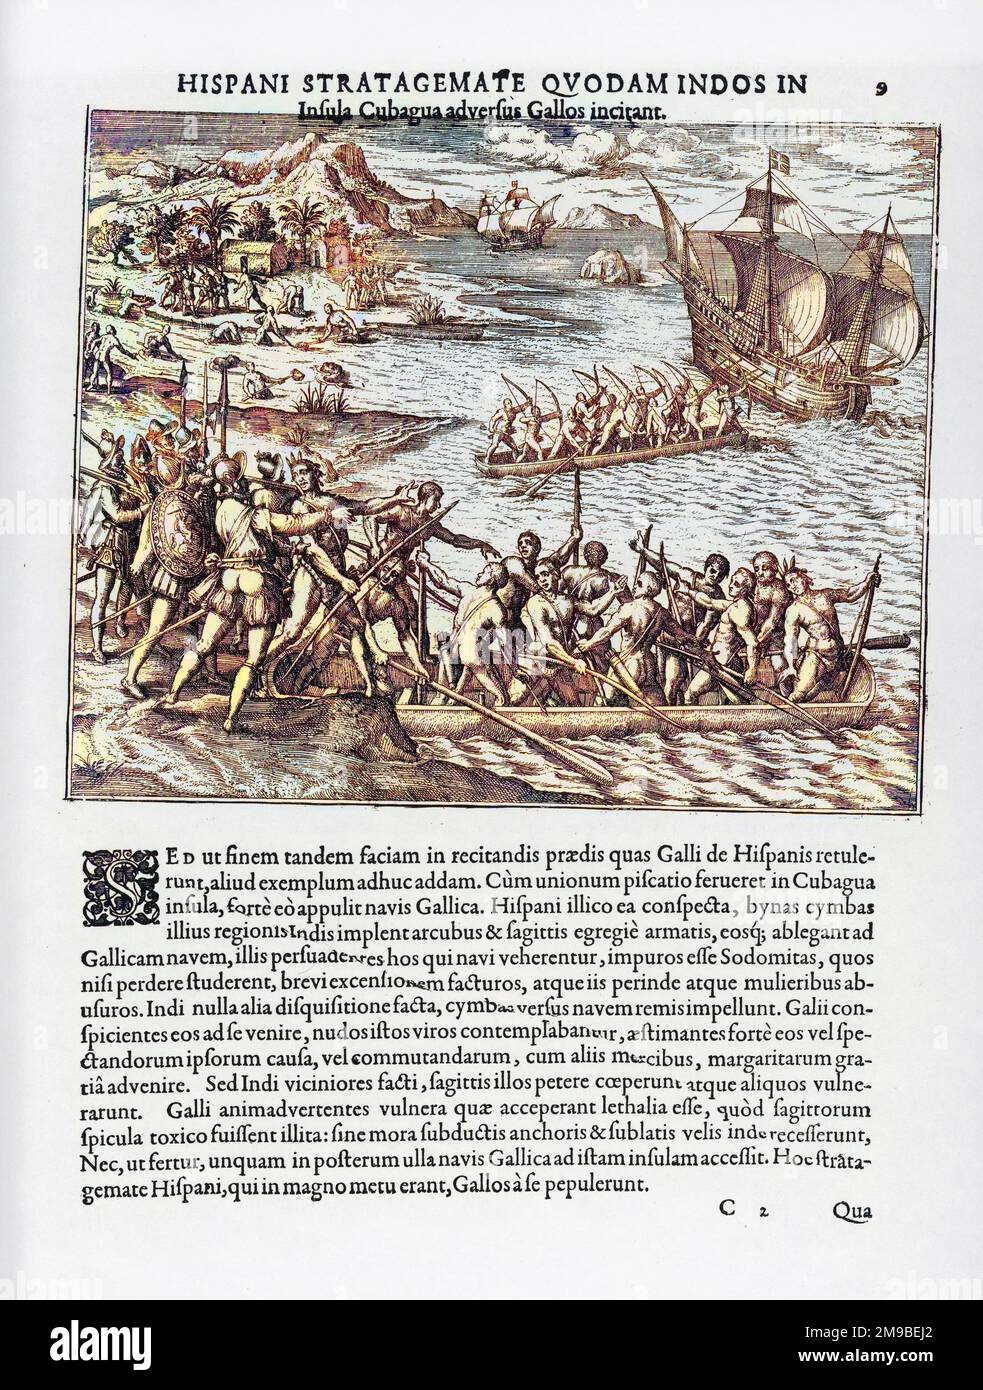 Spanish persuade the natives of Cubagua to defend the island against an attacking French vessel. Stock Photo